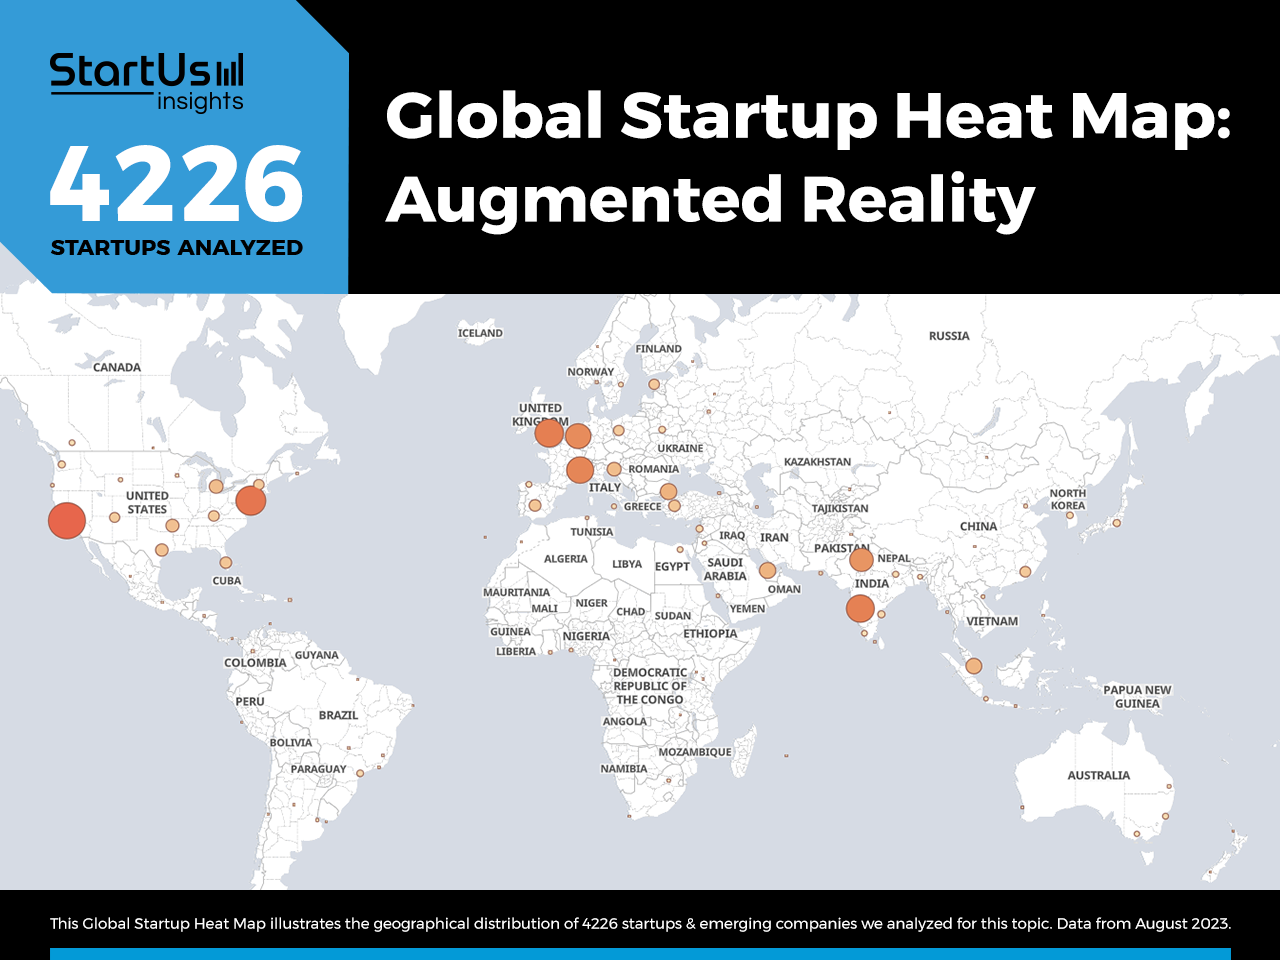 Augmented-Reality-trends-Startups-TrendResearch-Heat-Map-StartUs-Insights-noresize